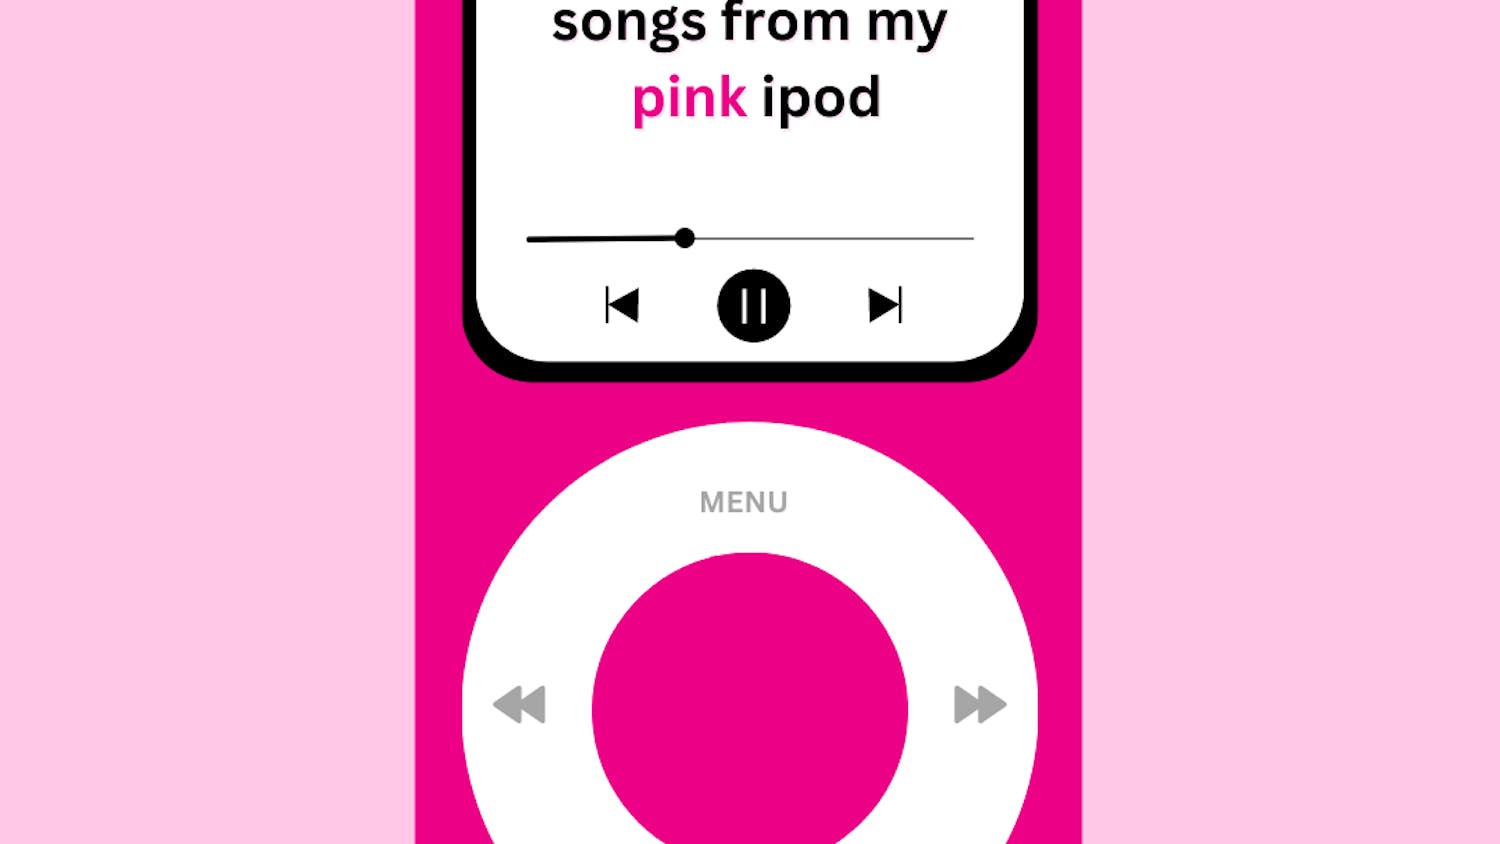 songs from pink ipod logo.png